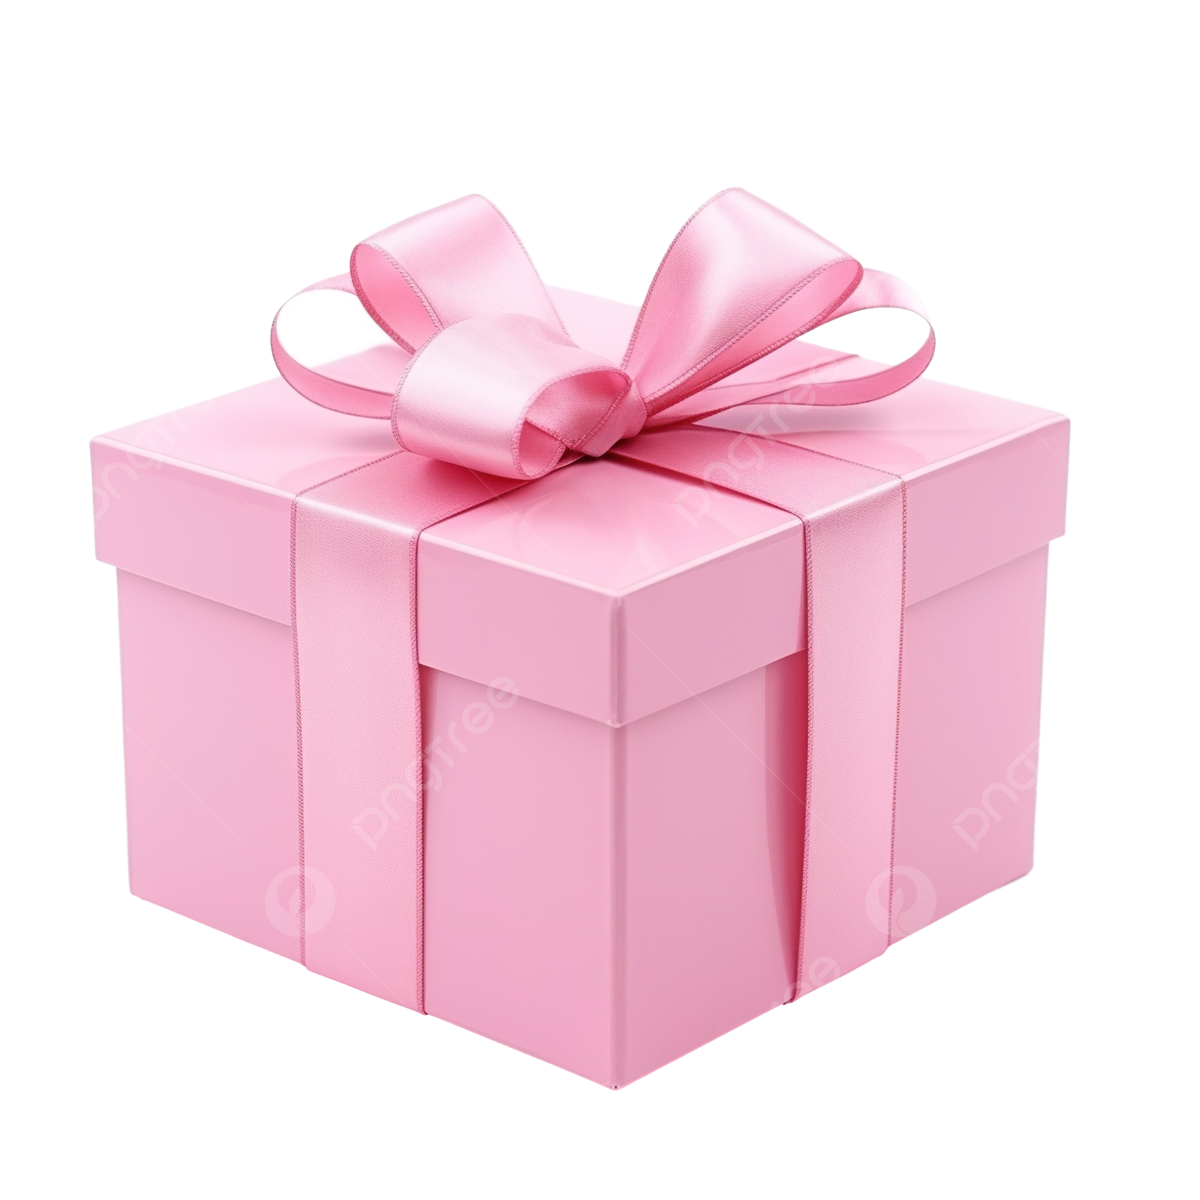 pngtree-pink-gift-box-outlined-png-image_13324236.png